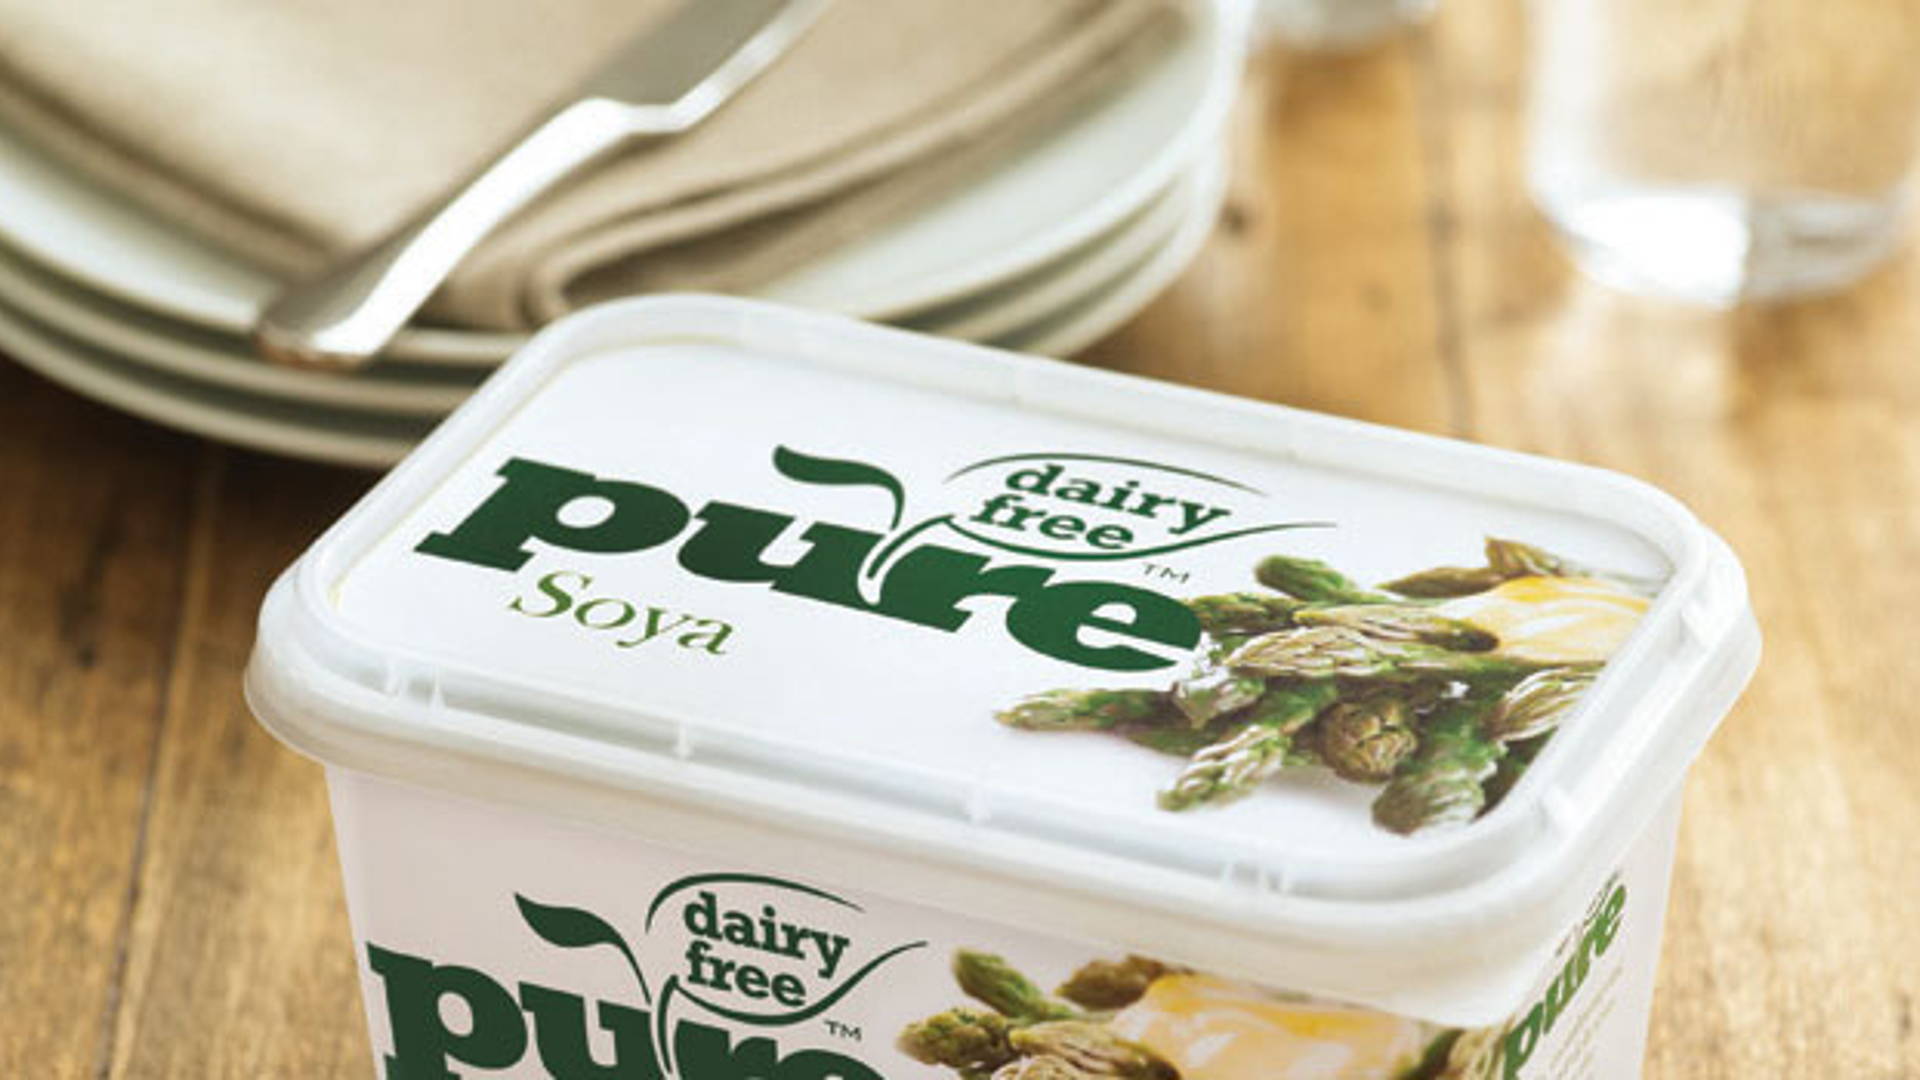 Featured image for Pure, Dairy Free